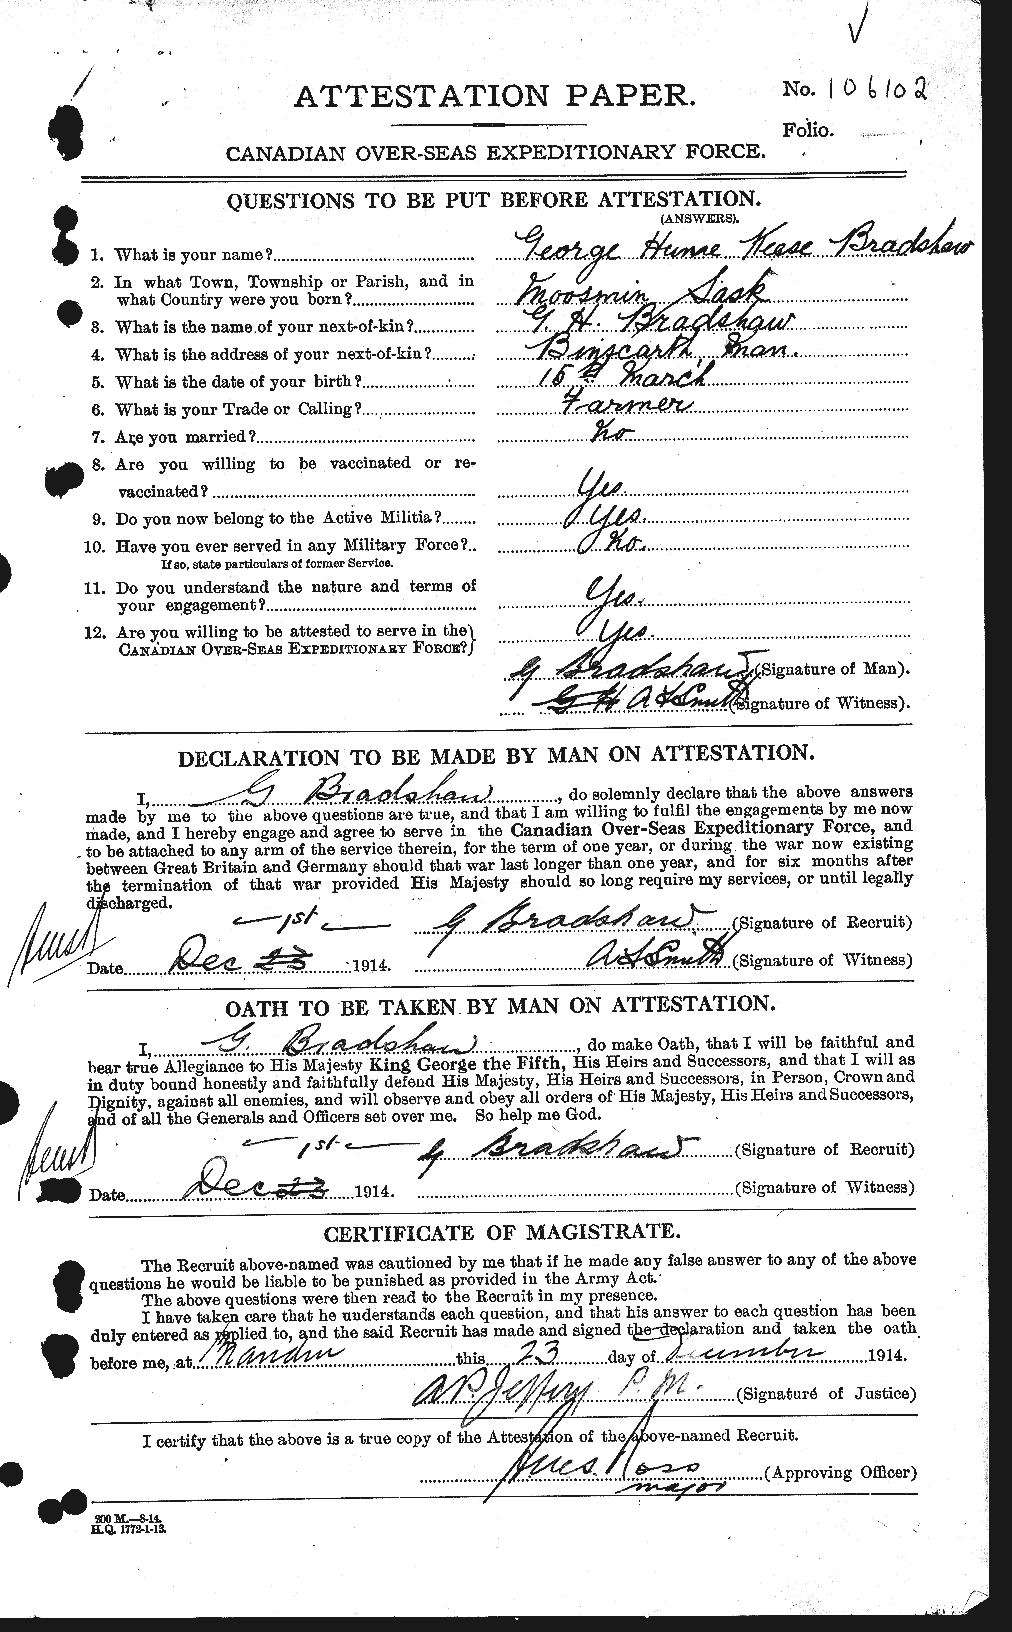 Personnel Records of the First World War - CEF 256626a